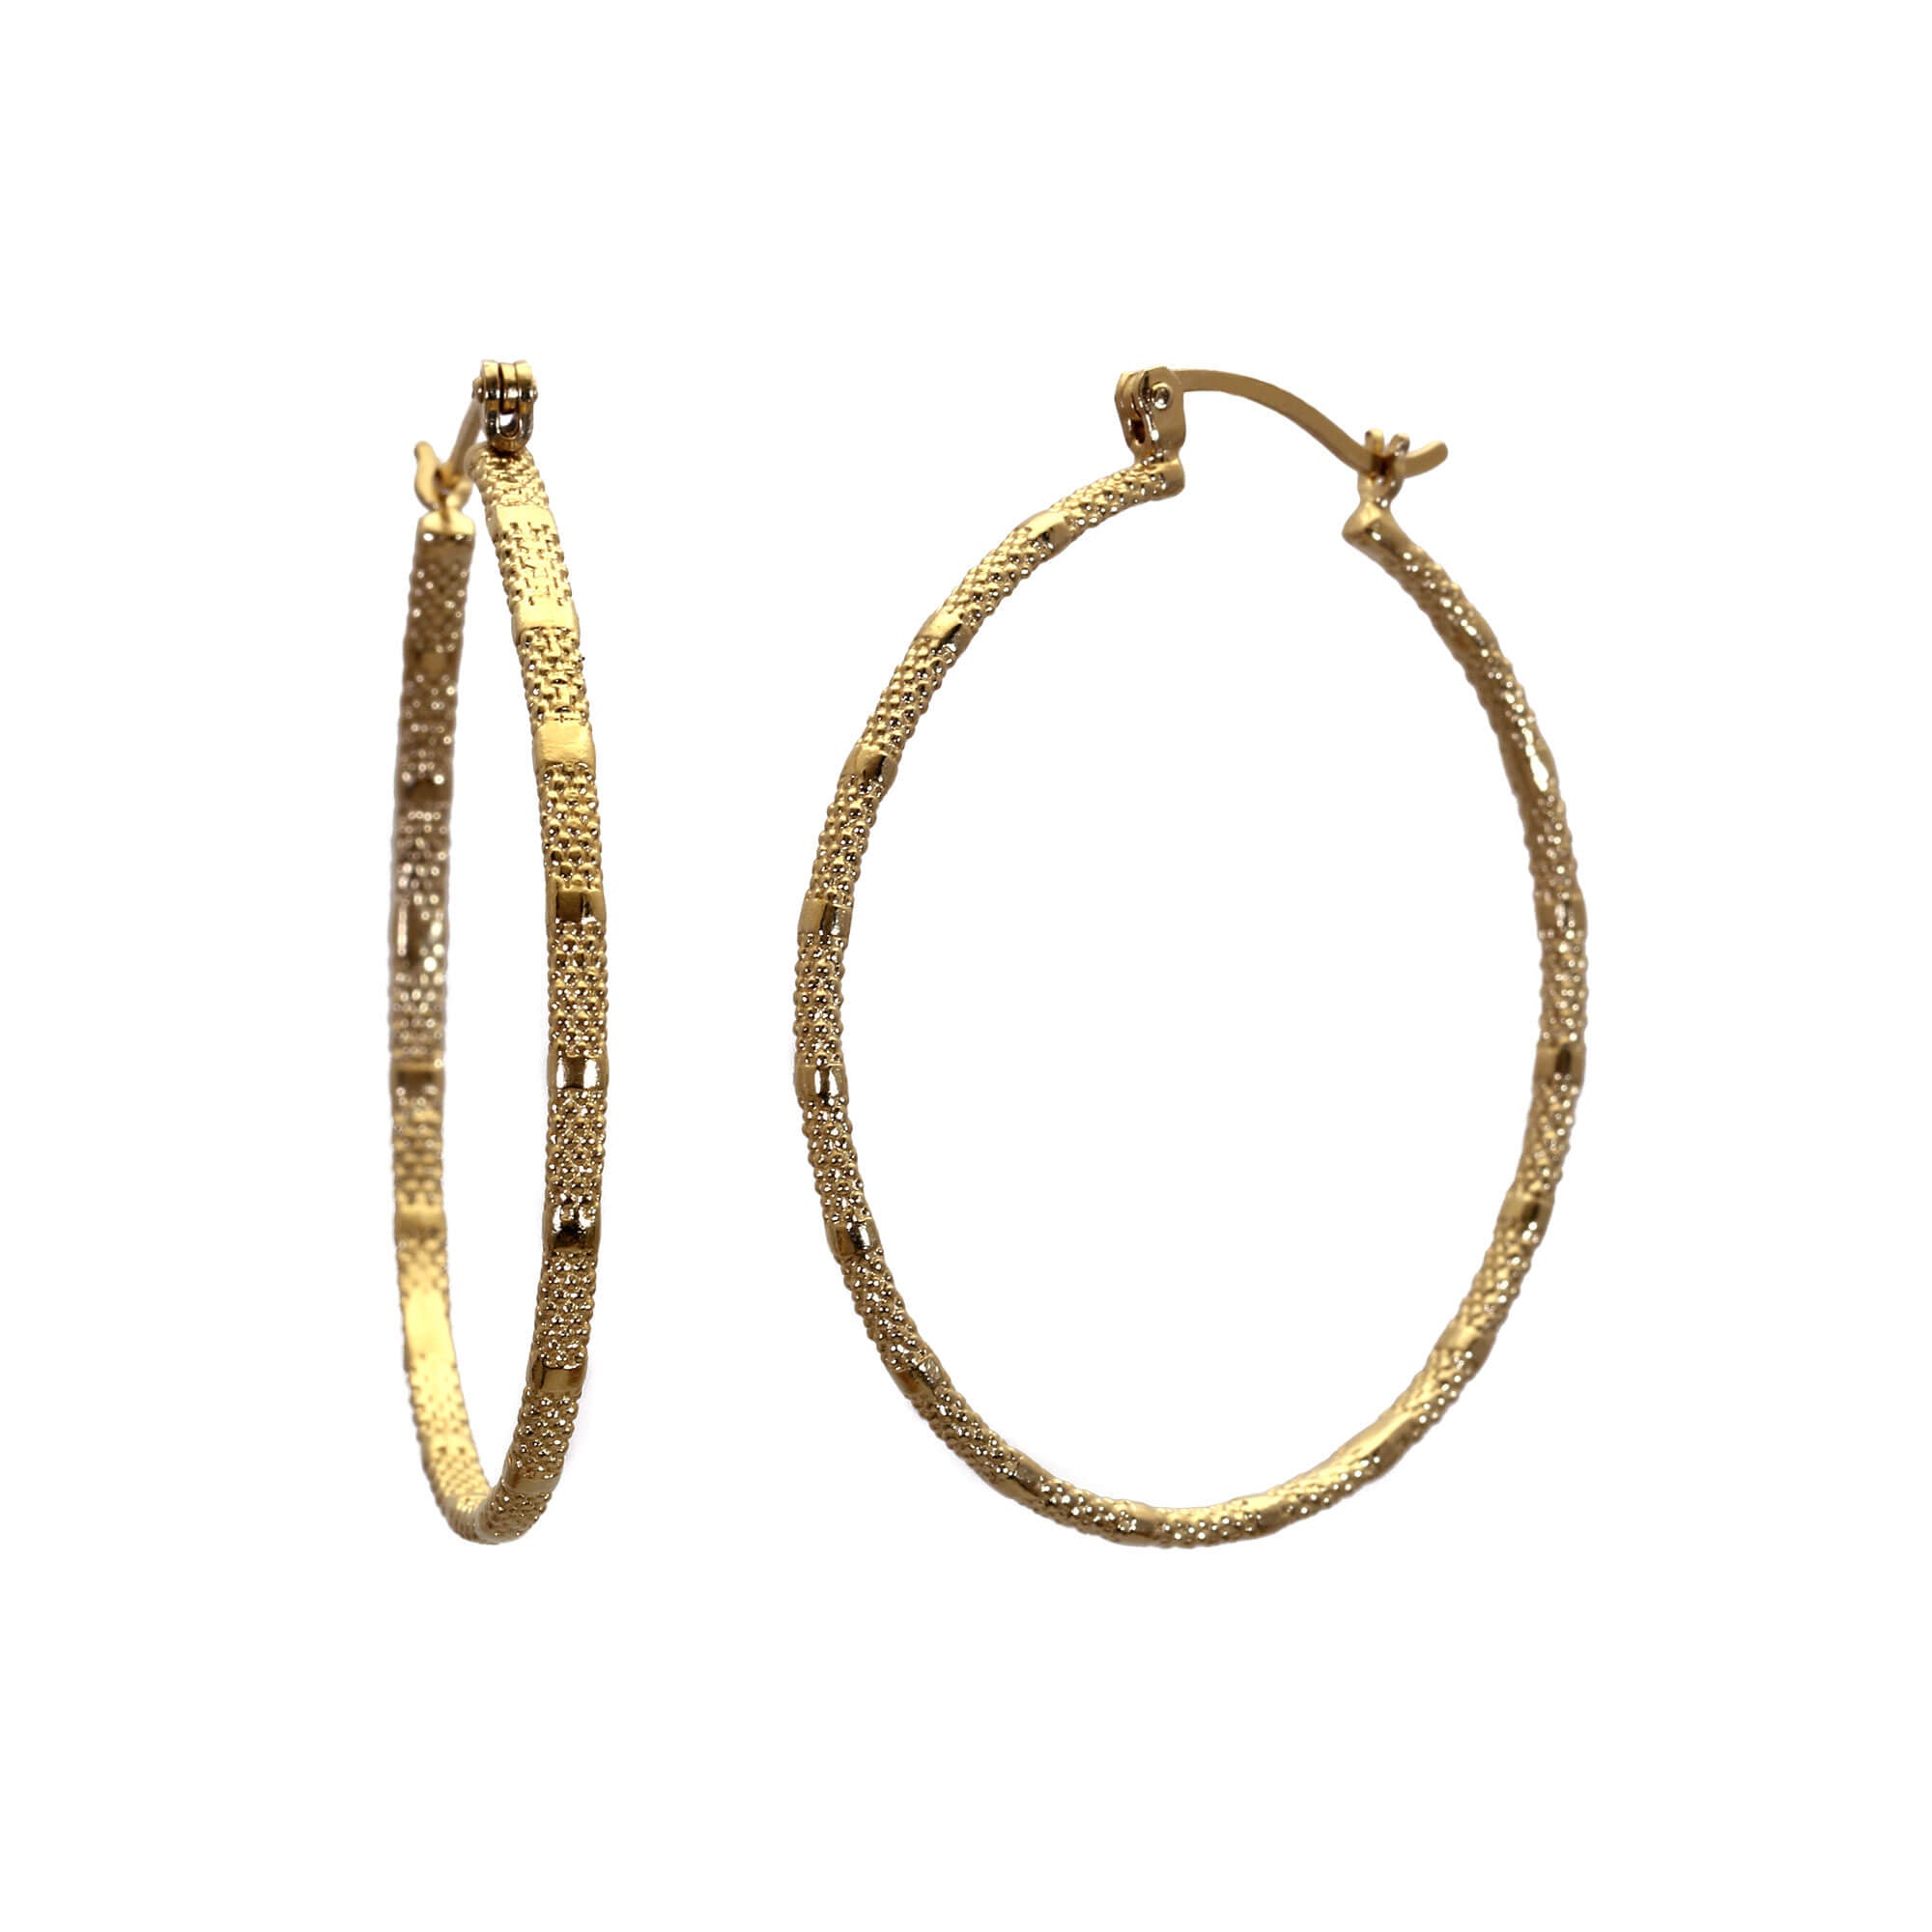 A pair of textures large oval gold hinged hoop earrings